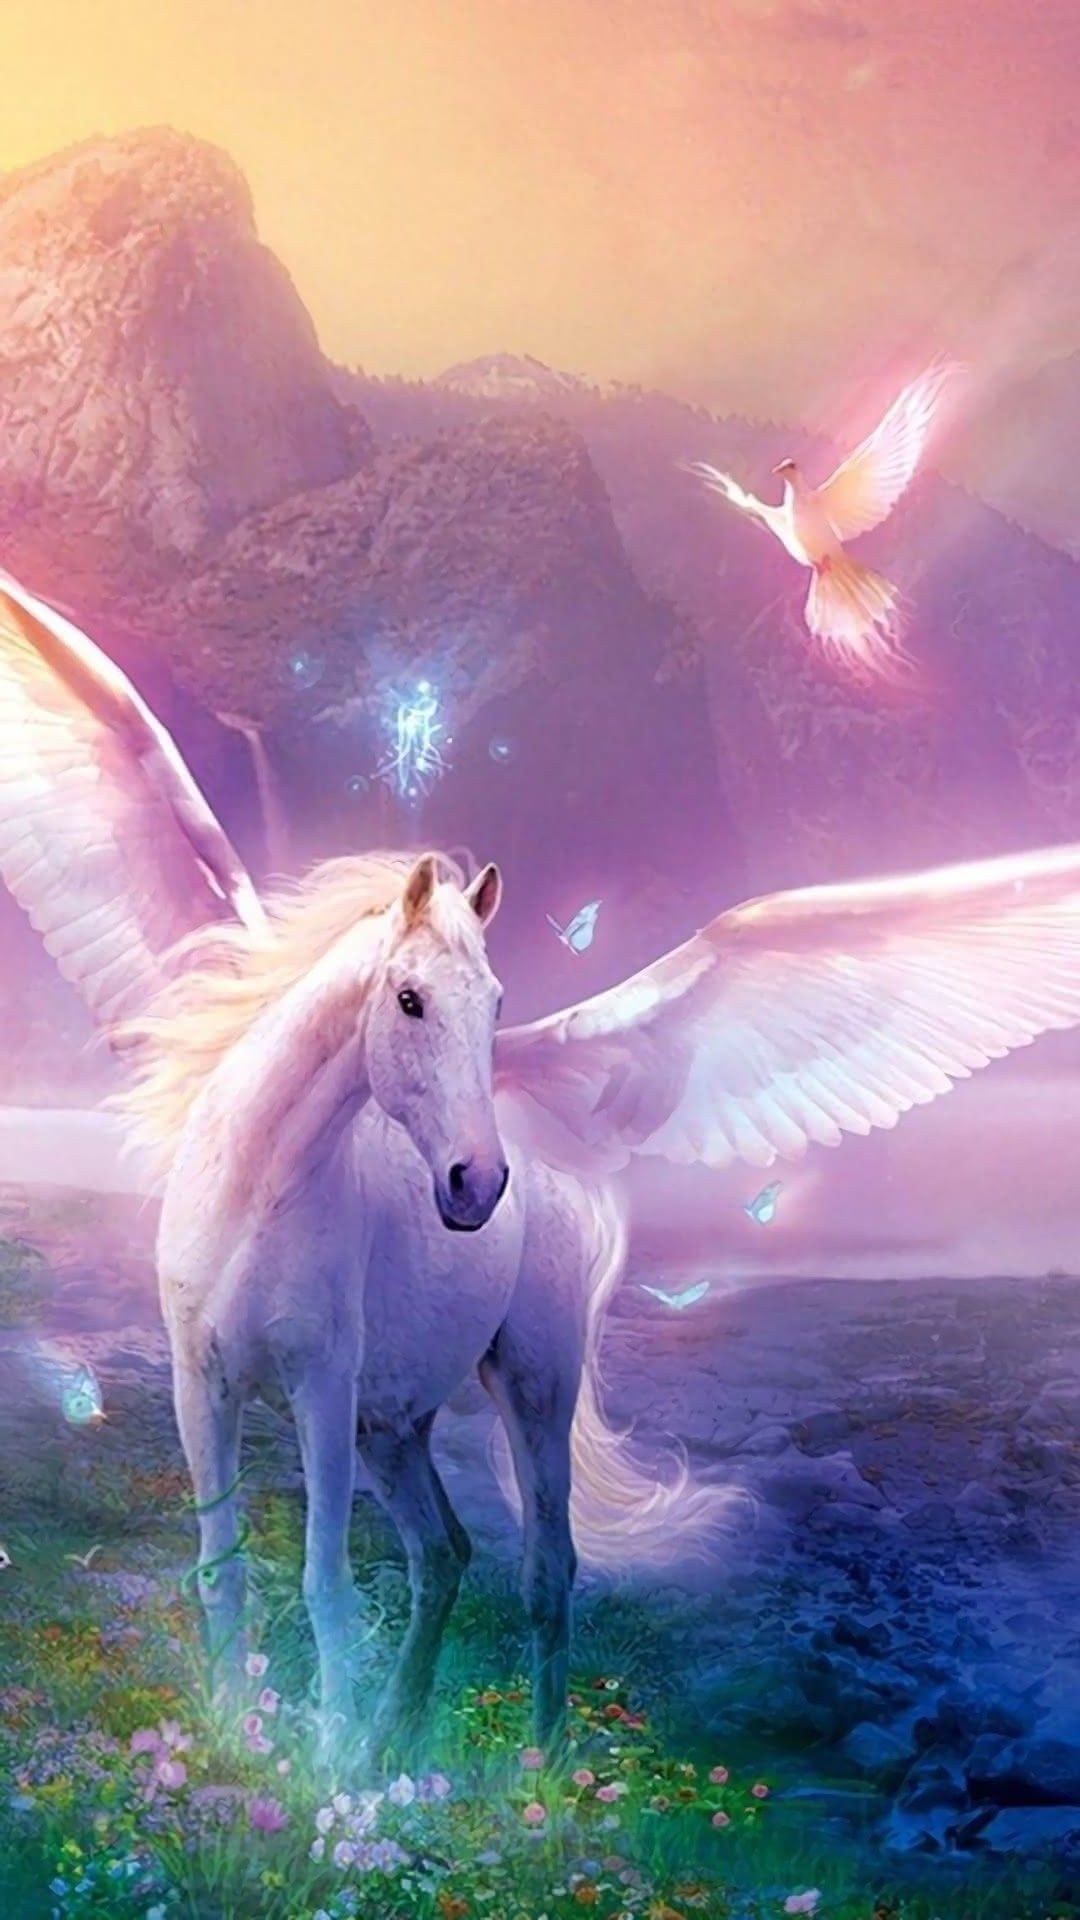 Girly Cute Unicorn Wallpapers - Wallpaper Cave